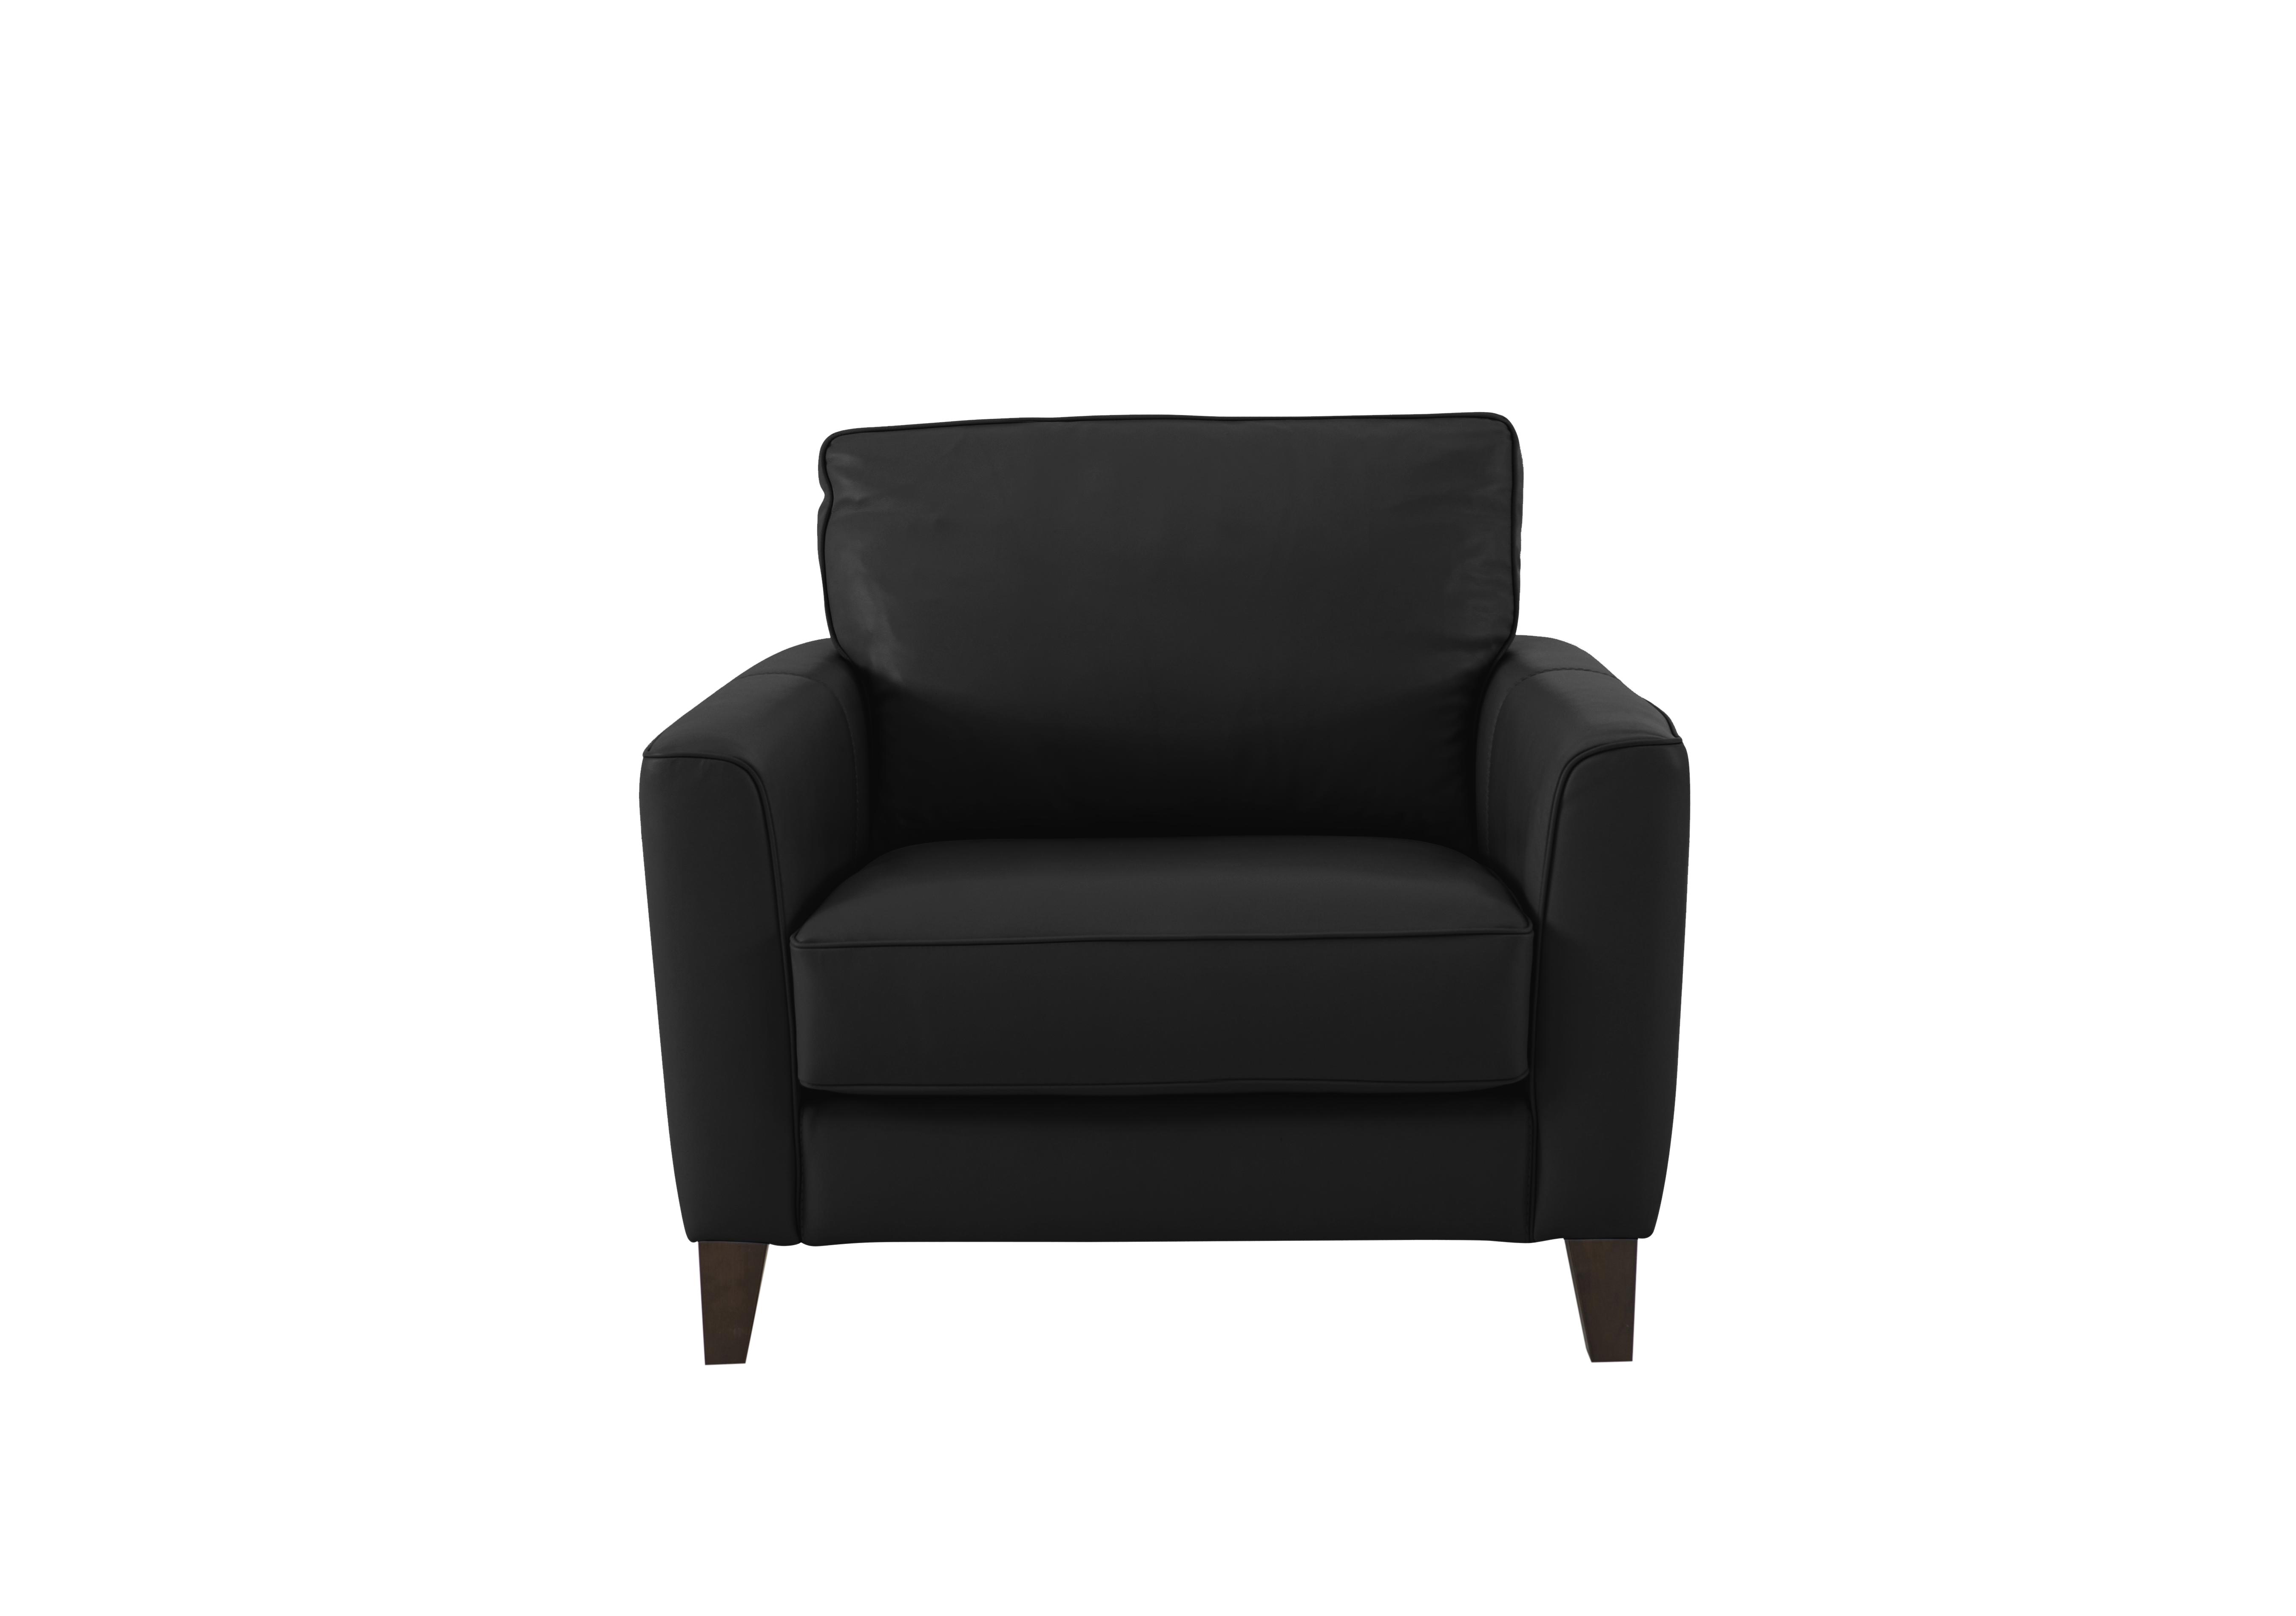 Brondby Leather Armchair in Bv-3500 Classic Black on Furniture Village